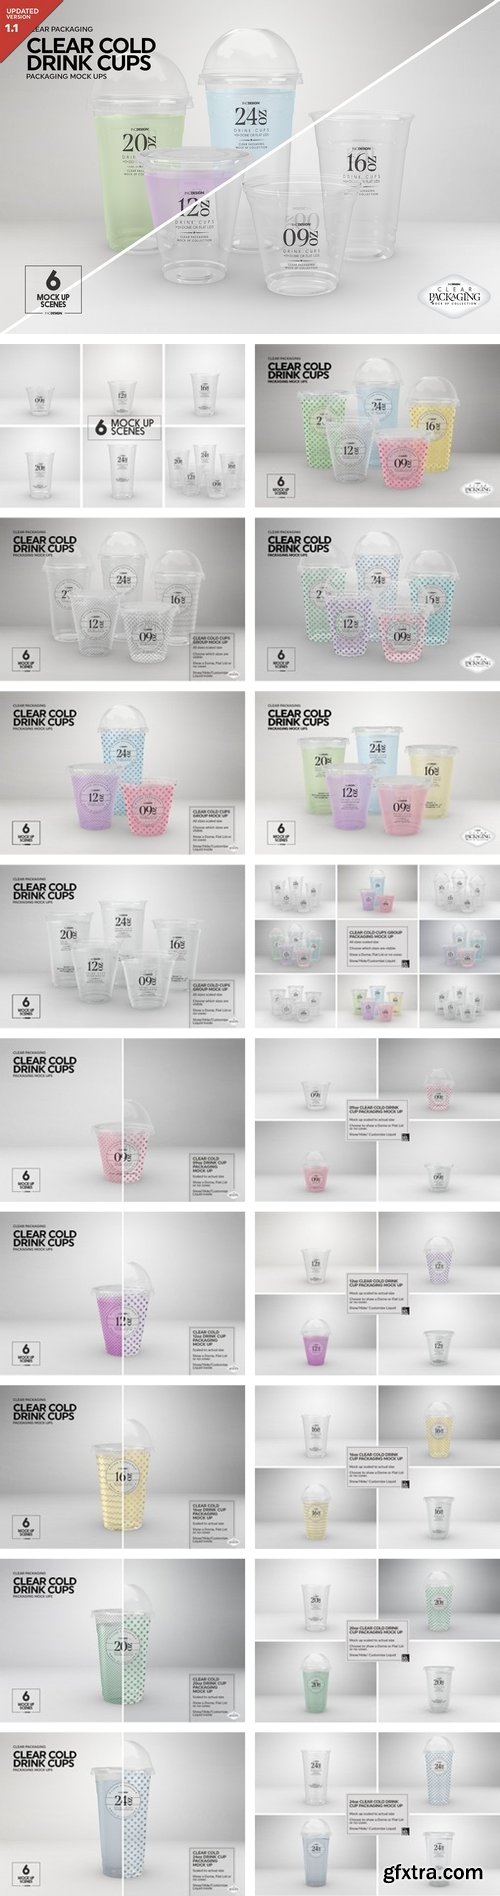 CM - Clear Cold Drink Cups MockUp 2051940